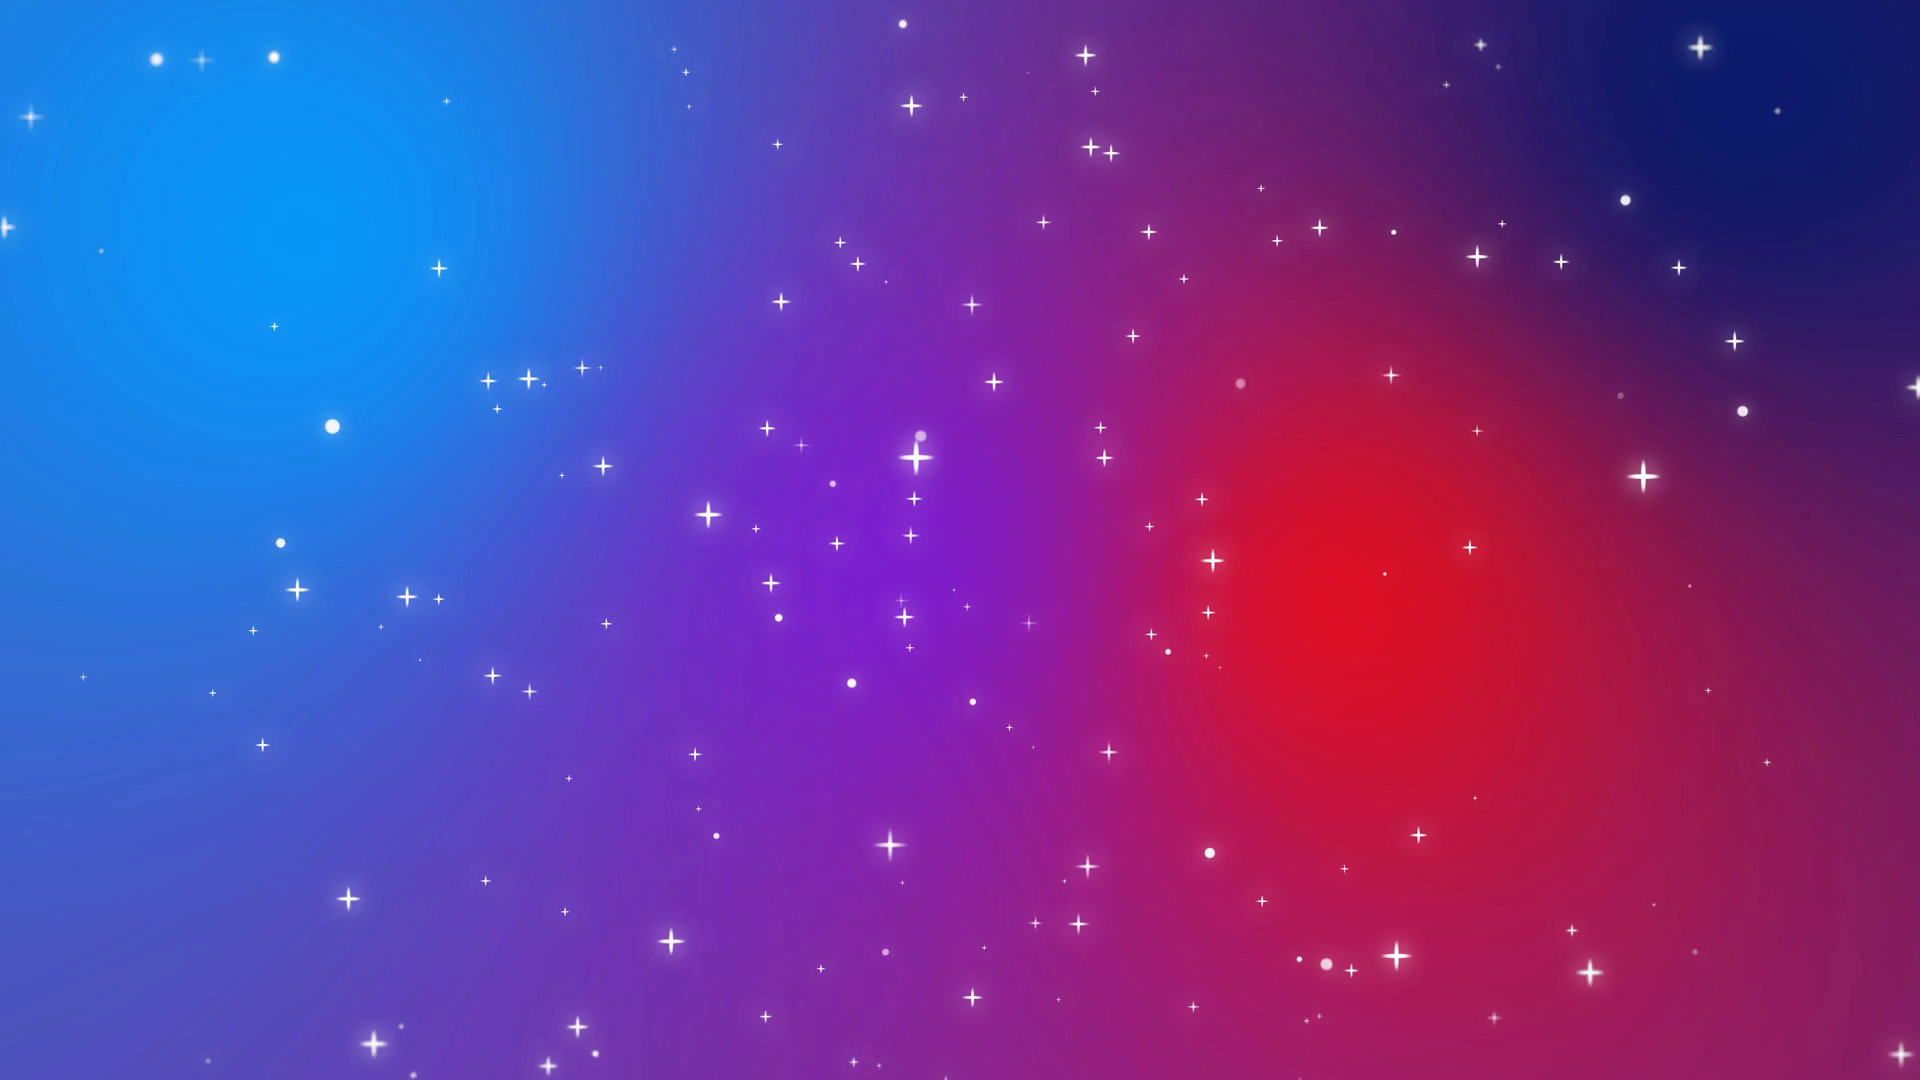 Subscription Library Sparkly white light particles moving across a red purple blue gradient background imitating night sky full